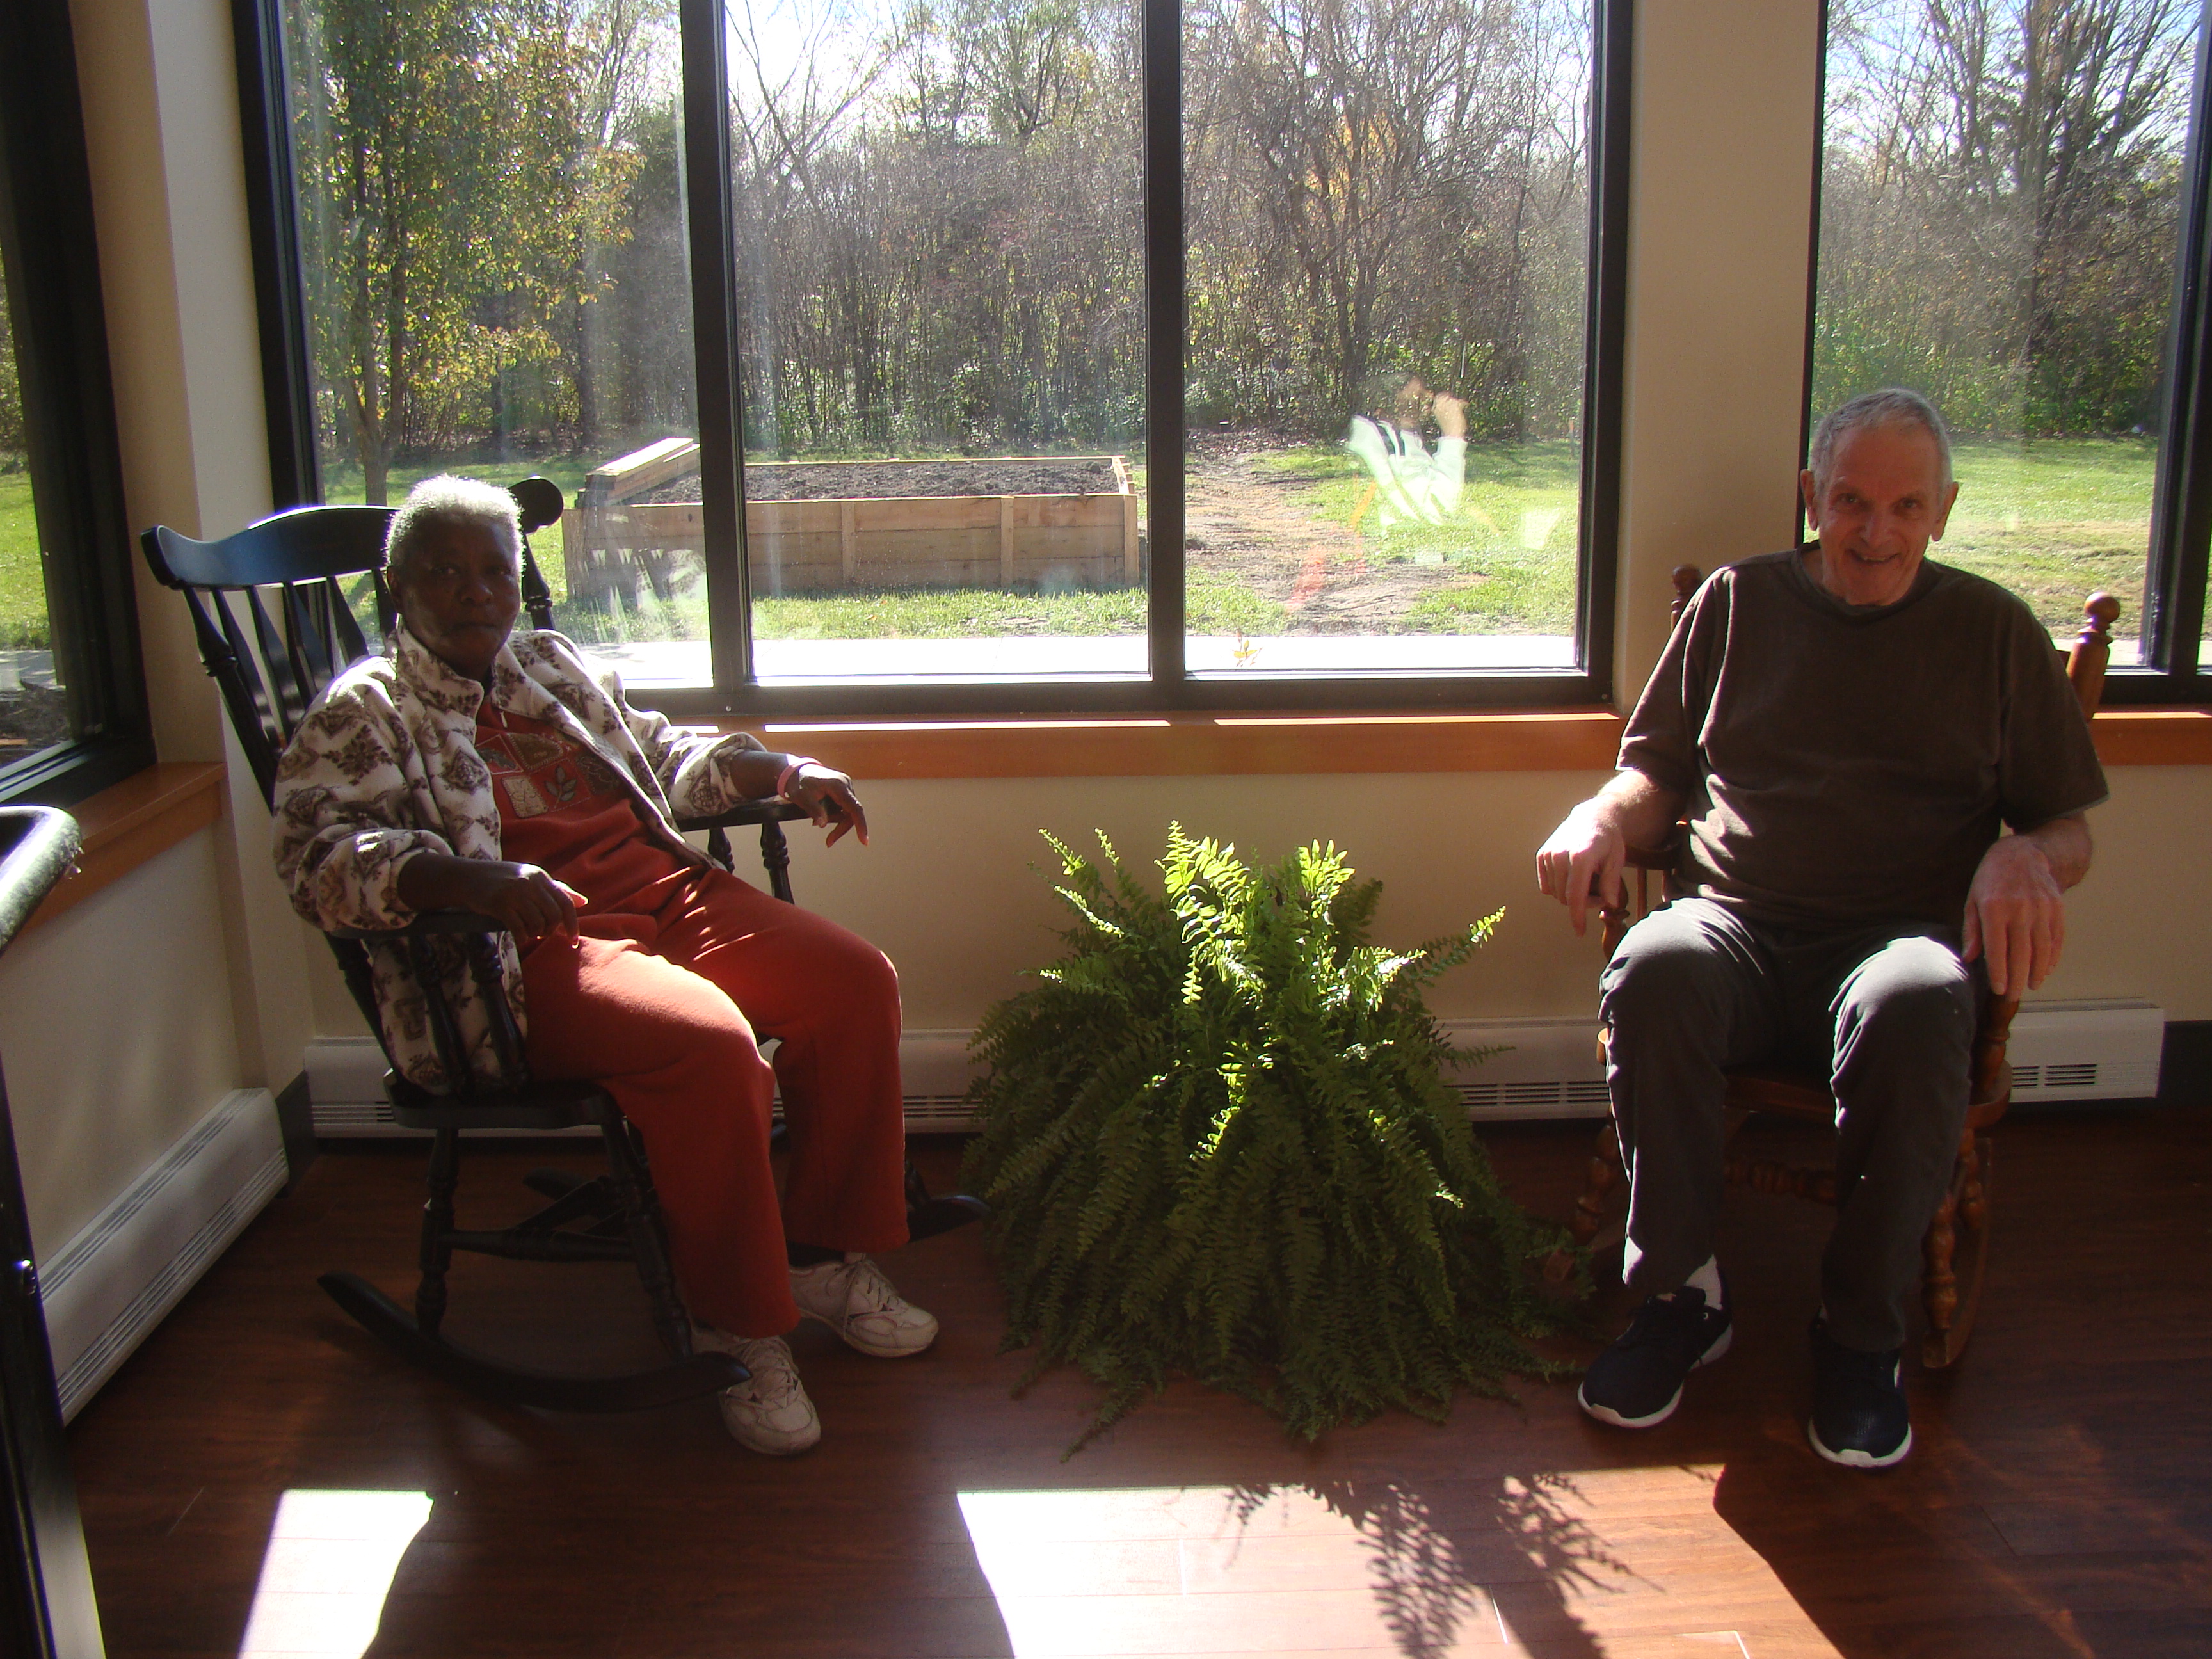 TARC's Day Services Participants enjoying the new sunroom in the Virginia Geers Building